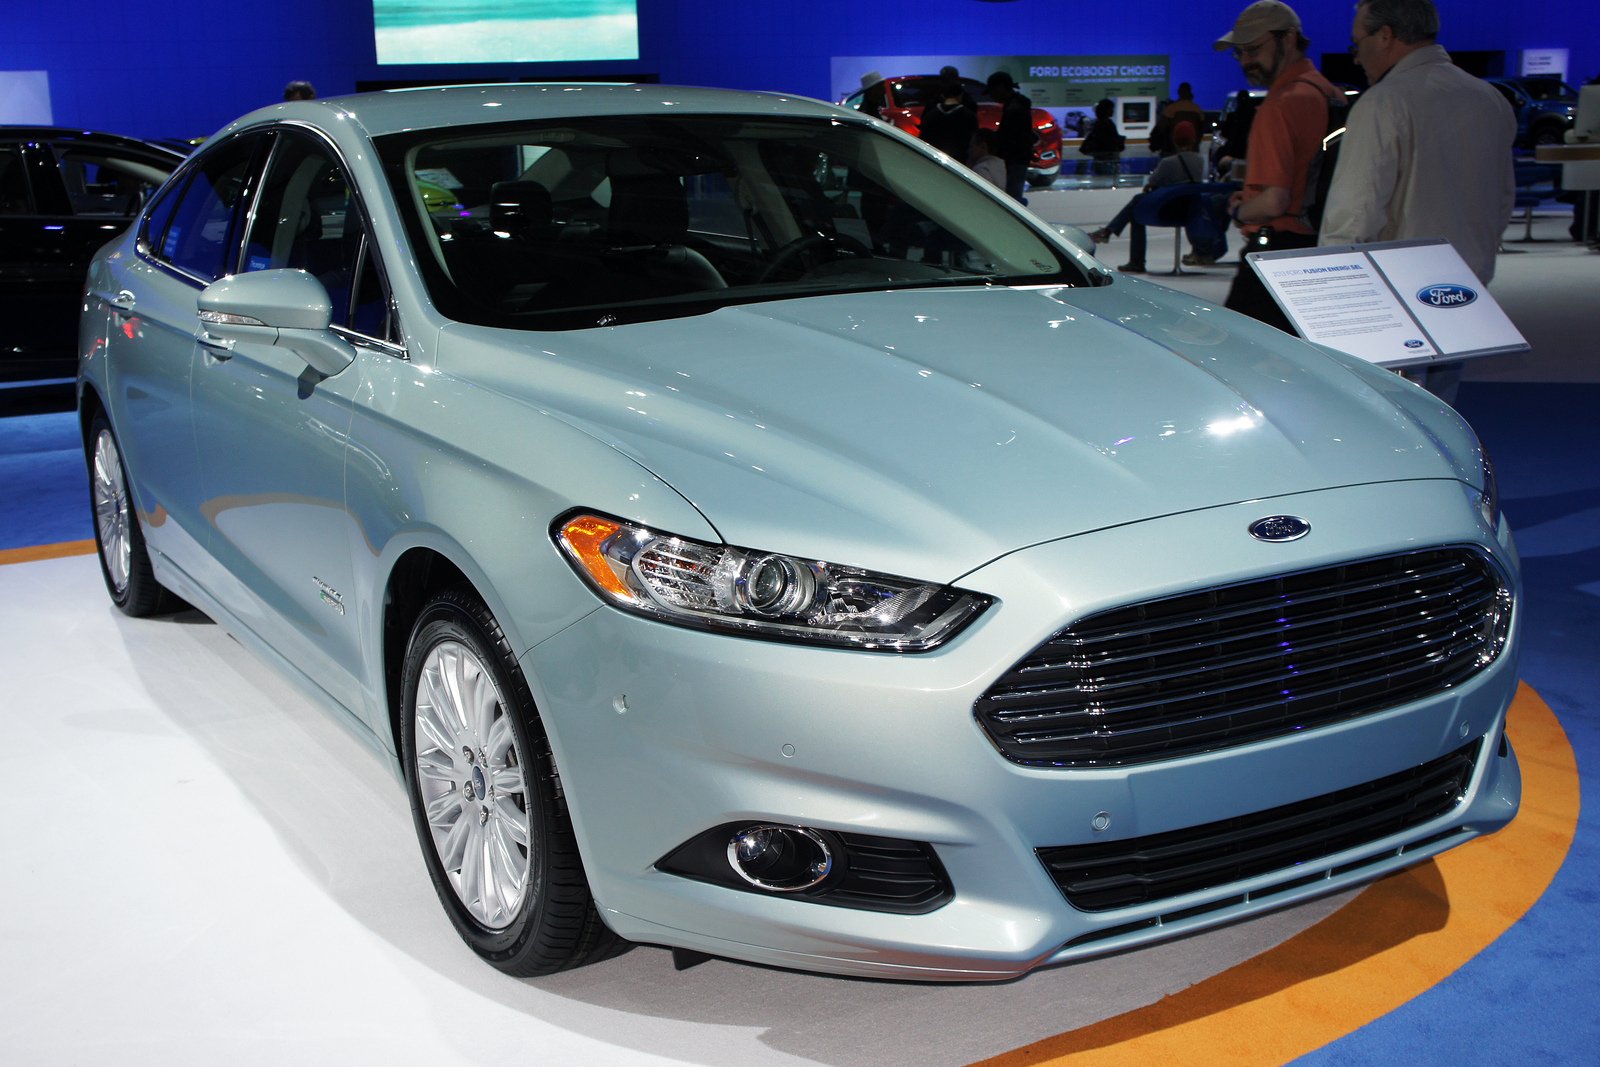 How much is car insurance for a Ford Fusion Hybrid?